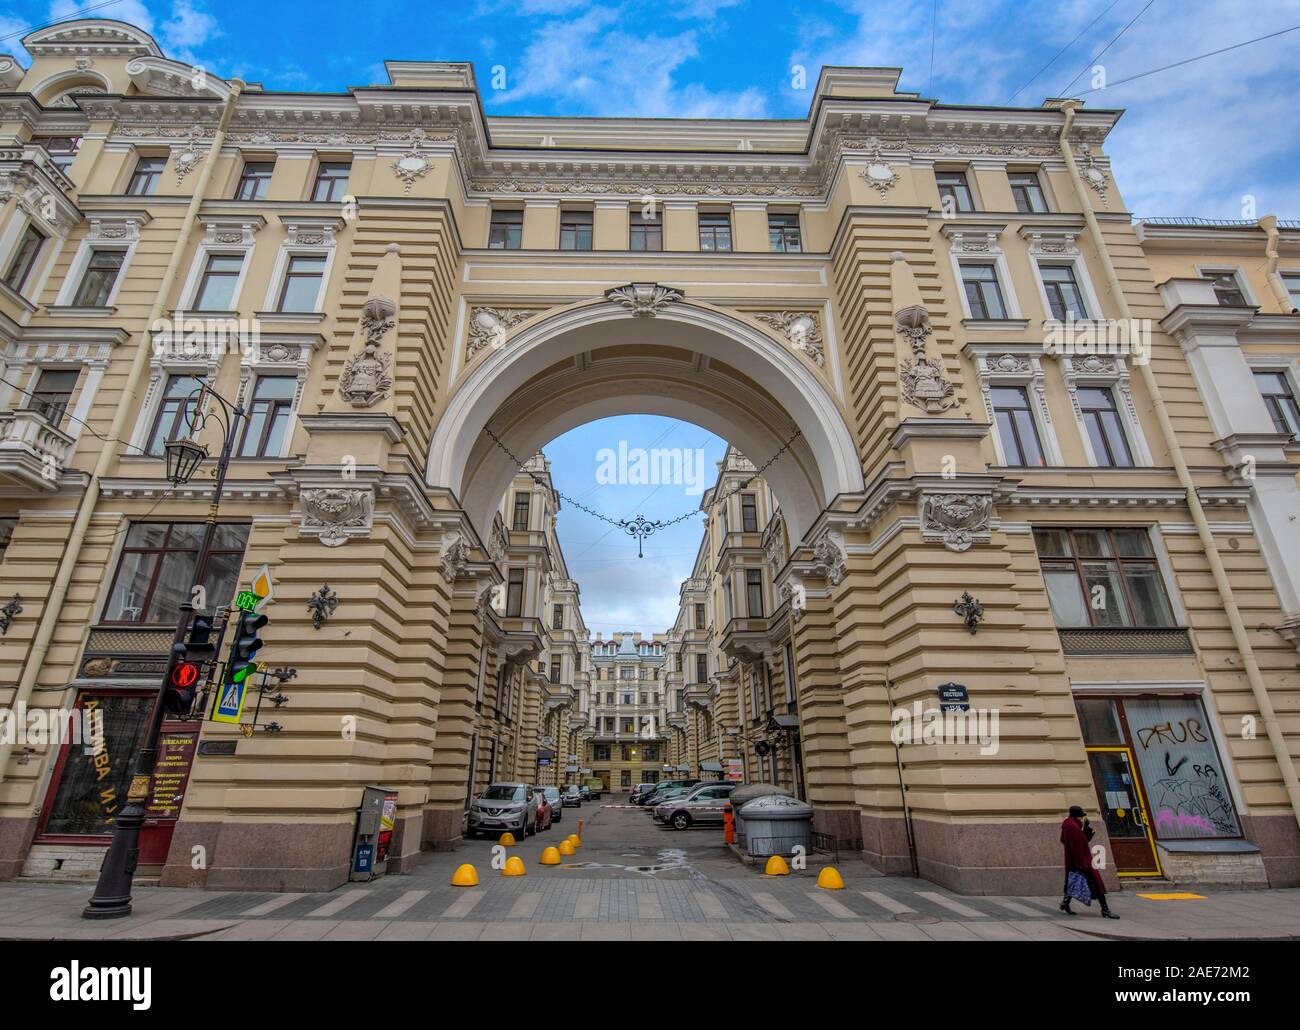 A facade of the building in classic neo-baroque style and statues in Saint Petersburg, Russia. Stock Photo